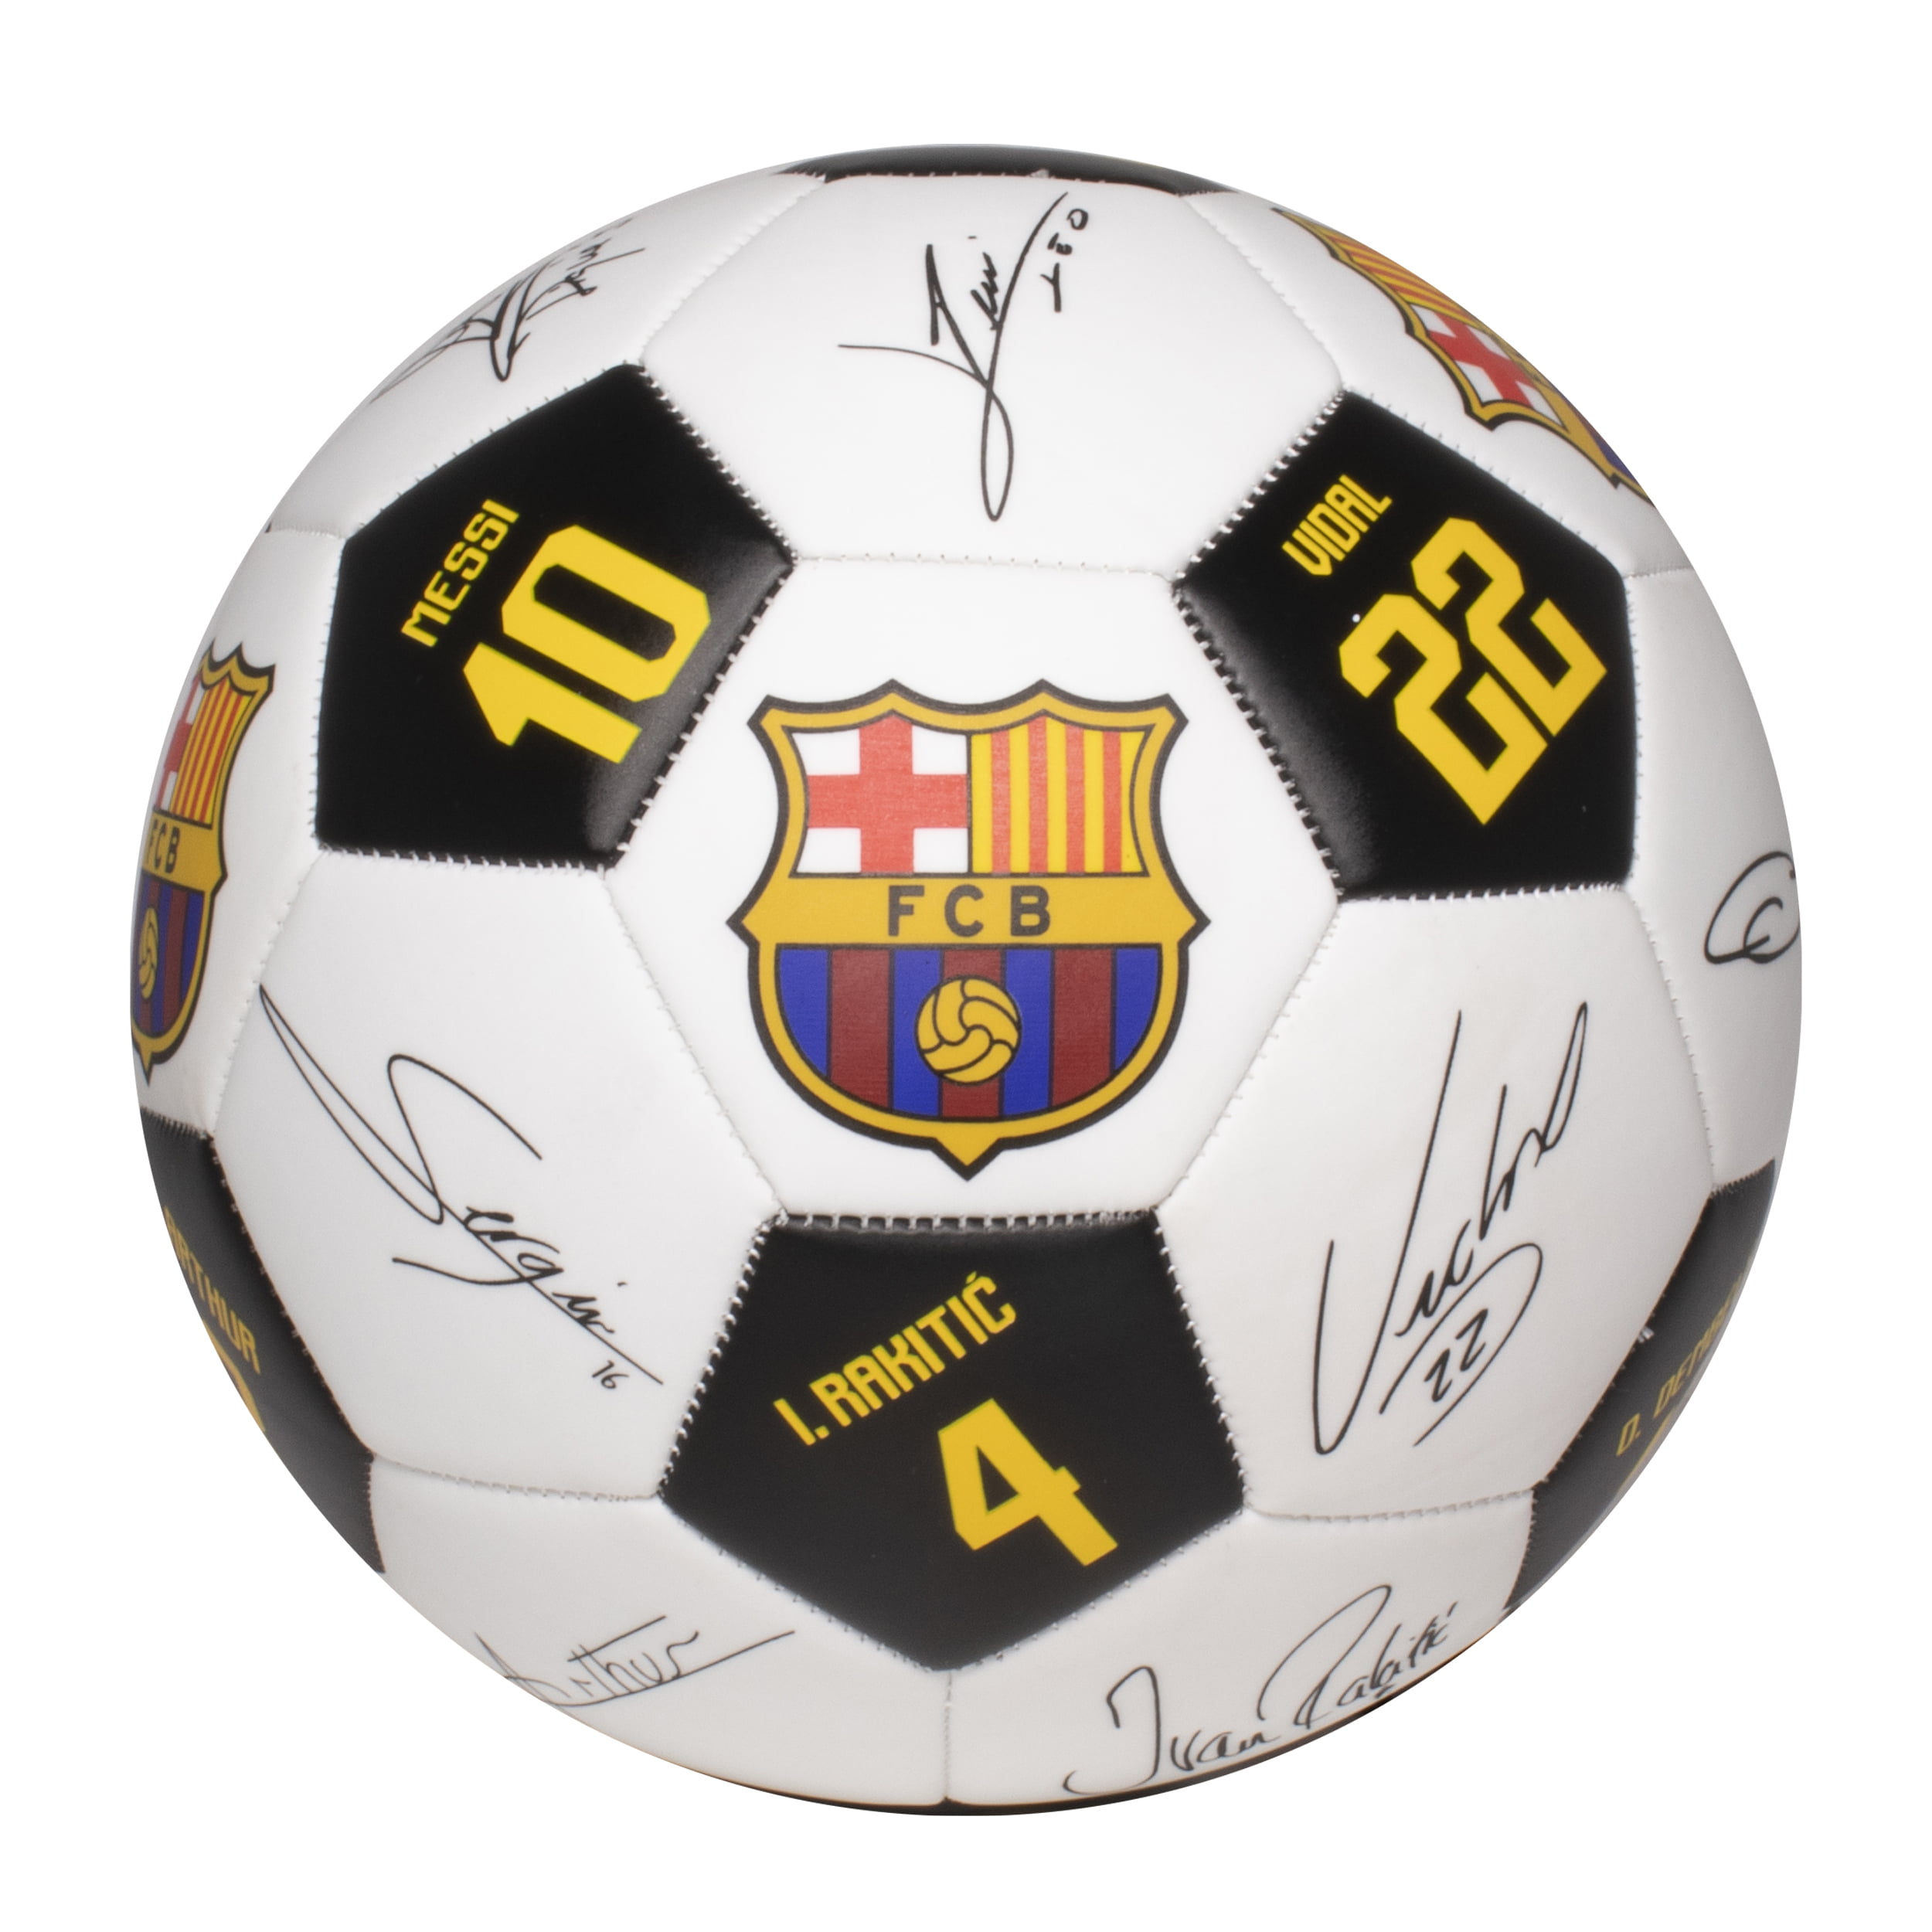 FC Barcelona Official Licensed Messi 10 Signature Soccer Ball 11-1 